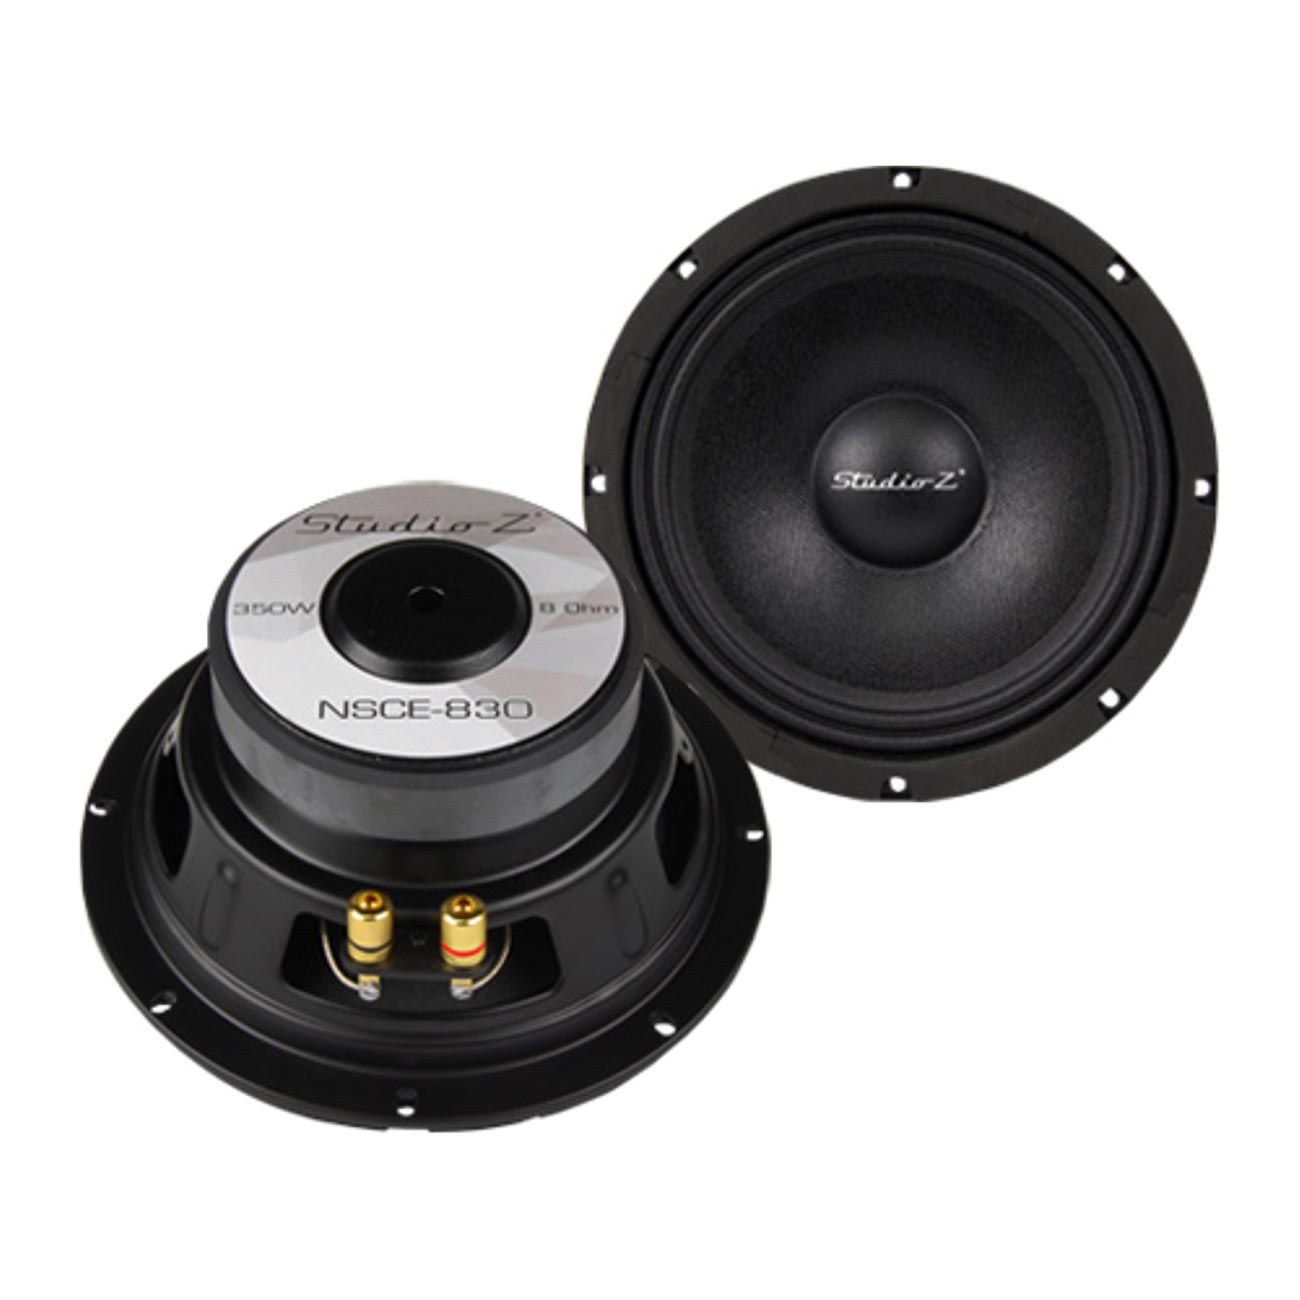 Studio Z 8" Woofer 350 watts Max 8 OHM with 1" Aluminum Voice Coil